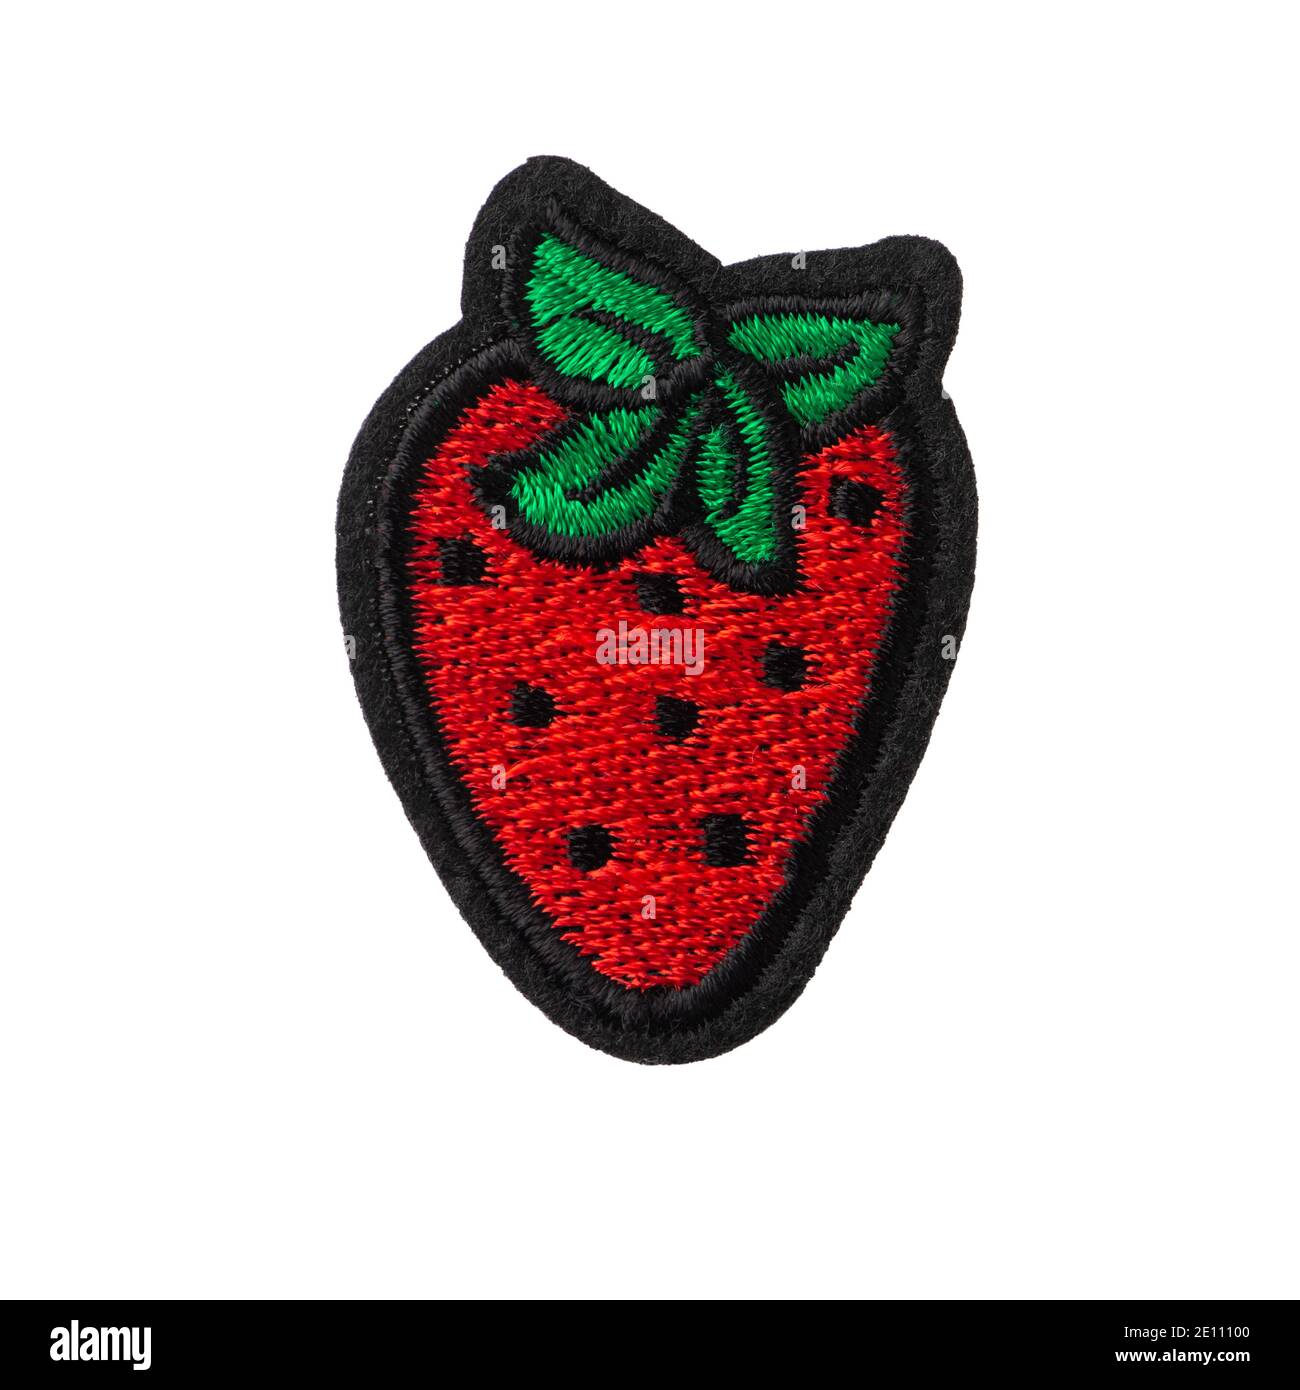 Strawberry embroidered patch isolated on white background Stock Photo